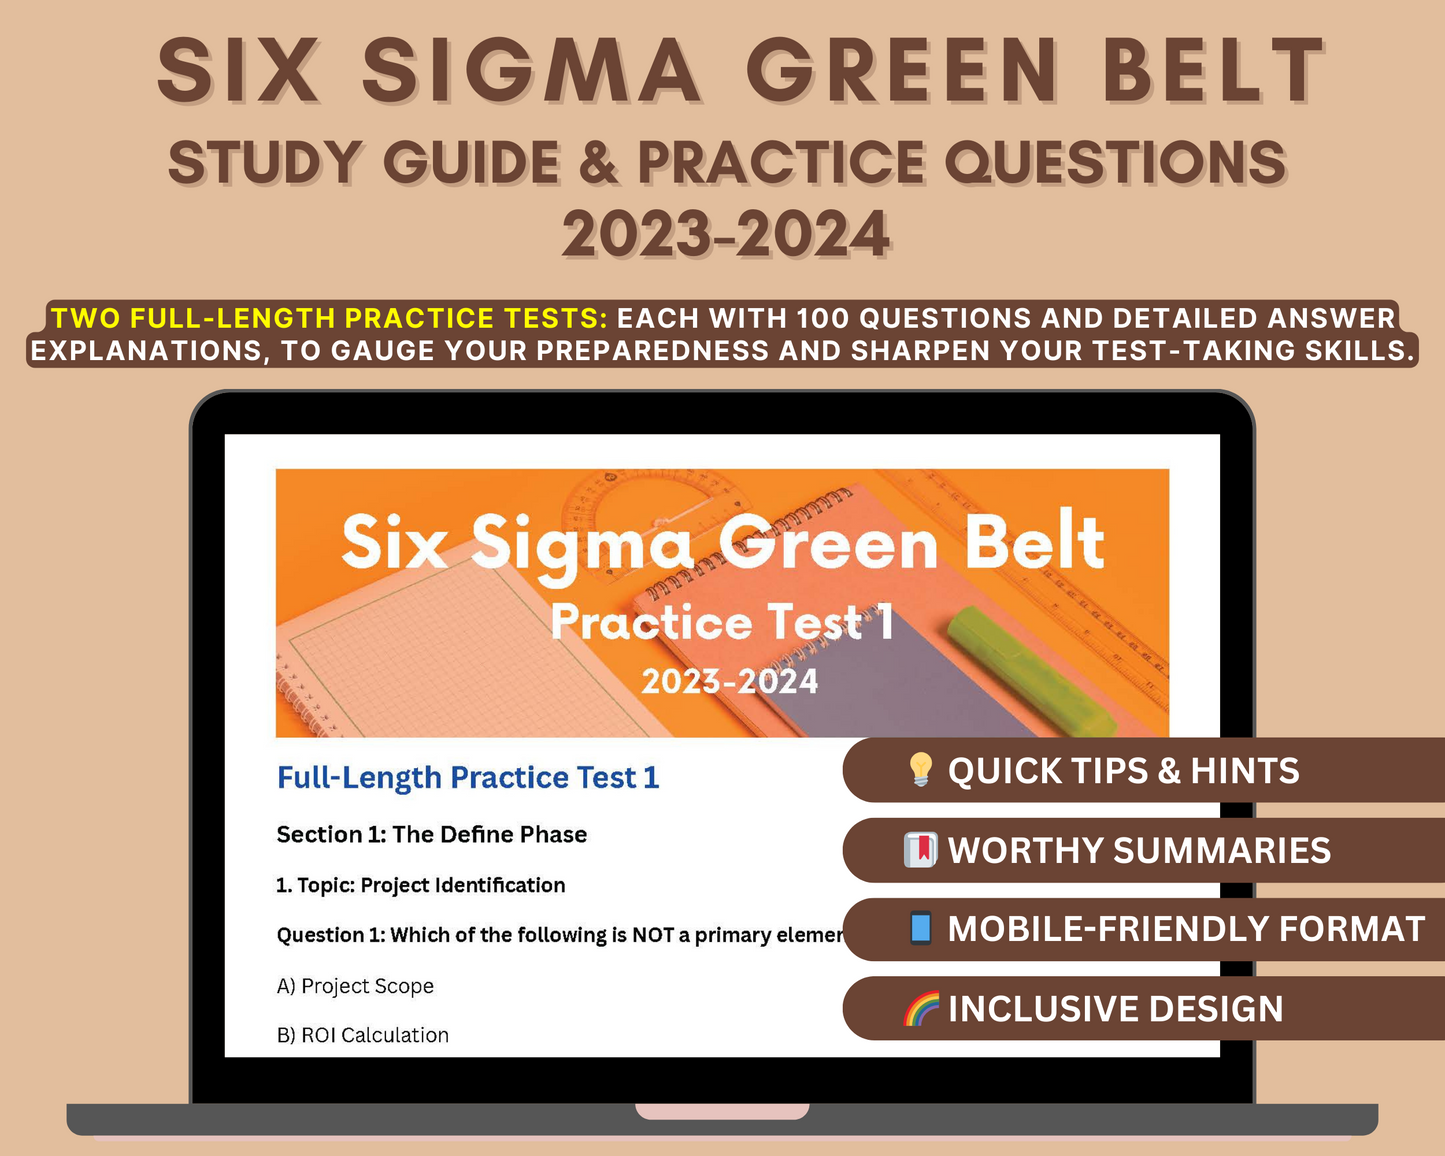 ASQ Six Sigma Green Belt Study Guide 2023-2024: In-Depth Review, Practice Tests & Exam Tips for Certification Success